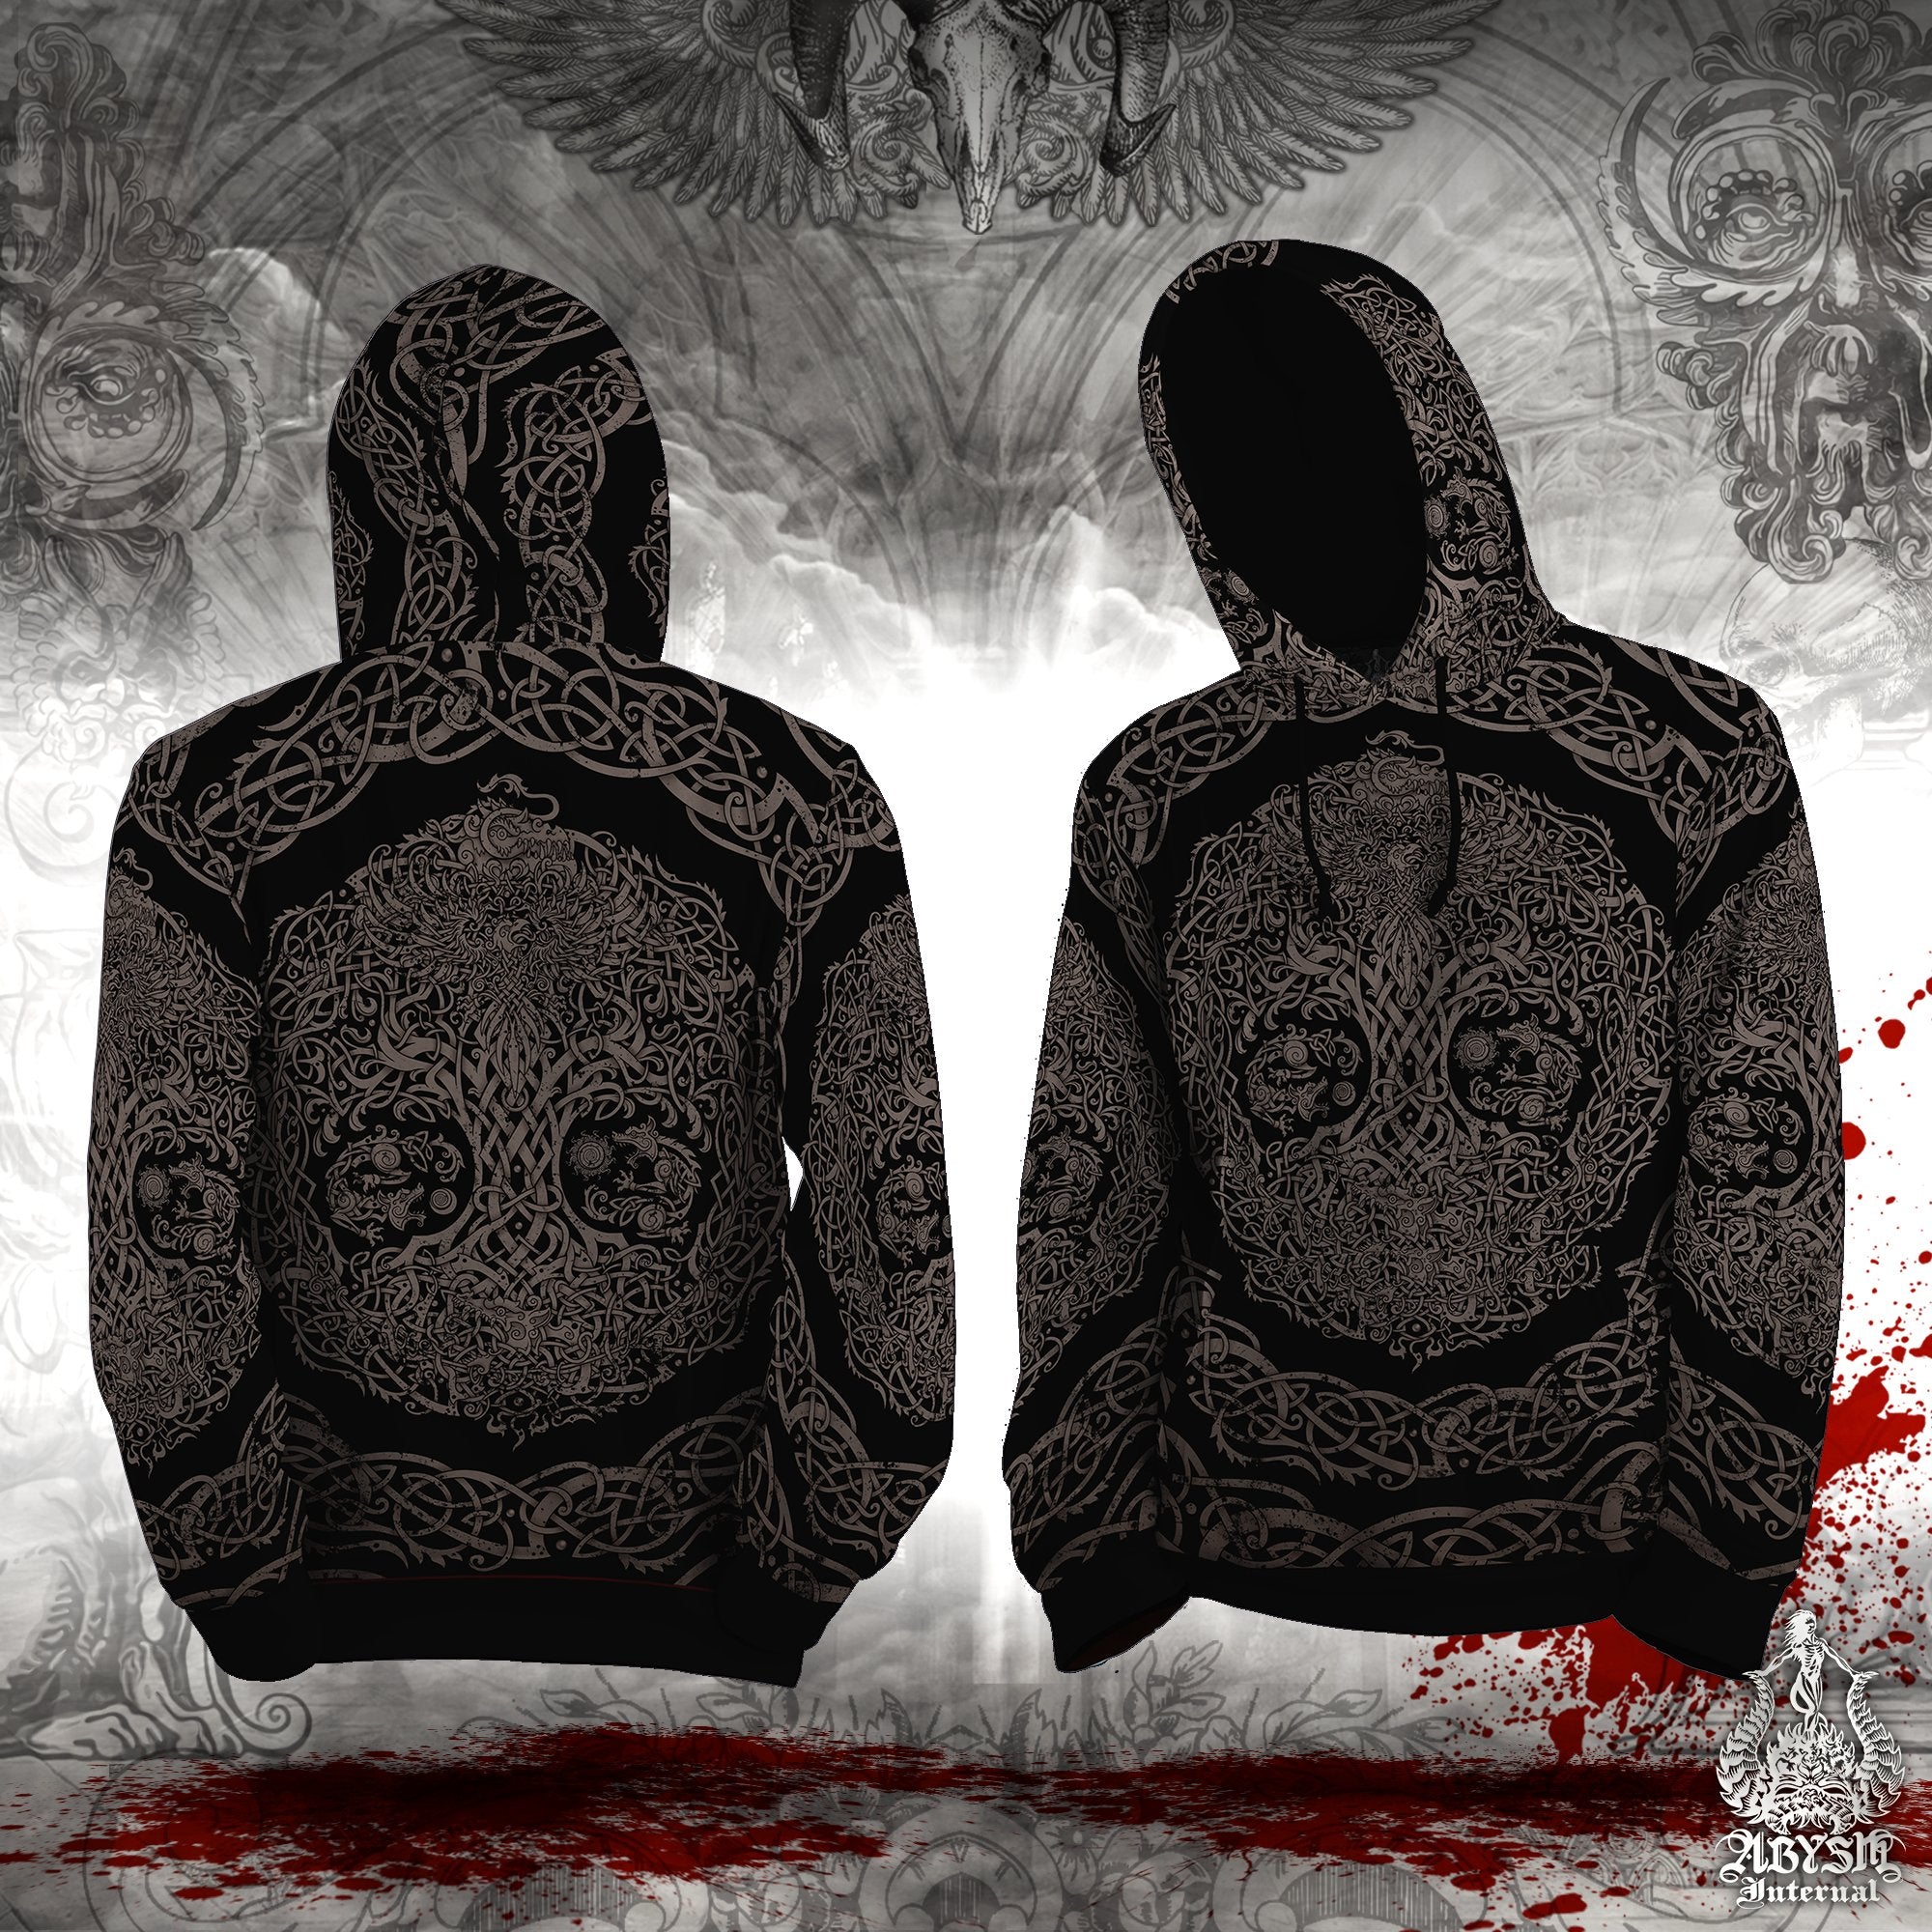 Yggdrasil Hoodie, Black and Grey Knotwork Pullover, Viking Streetwear, Pagan Outfit, Norse Art Sweater, Alternative Clothing, Unisex - Nordic Tree of Life, Grit - Abysm Internal